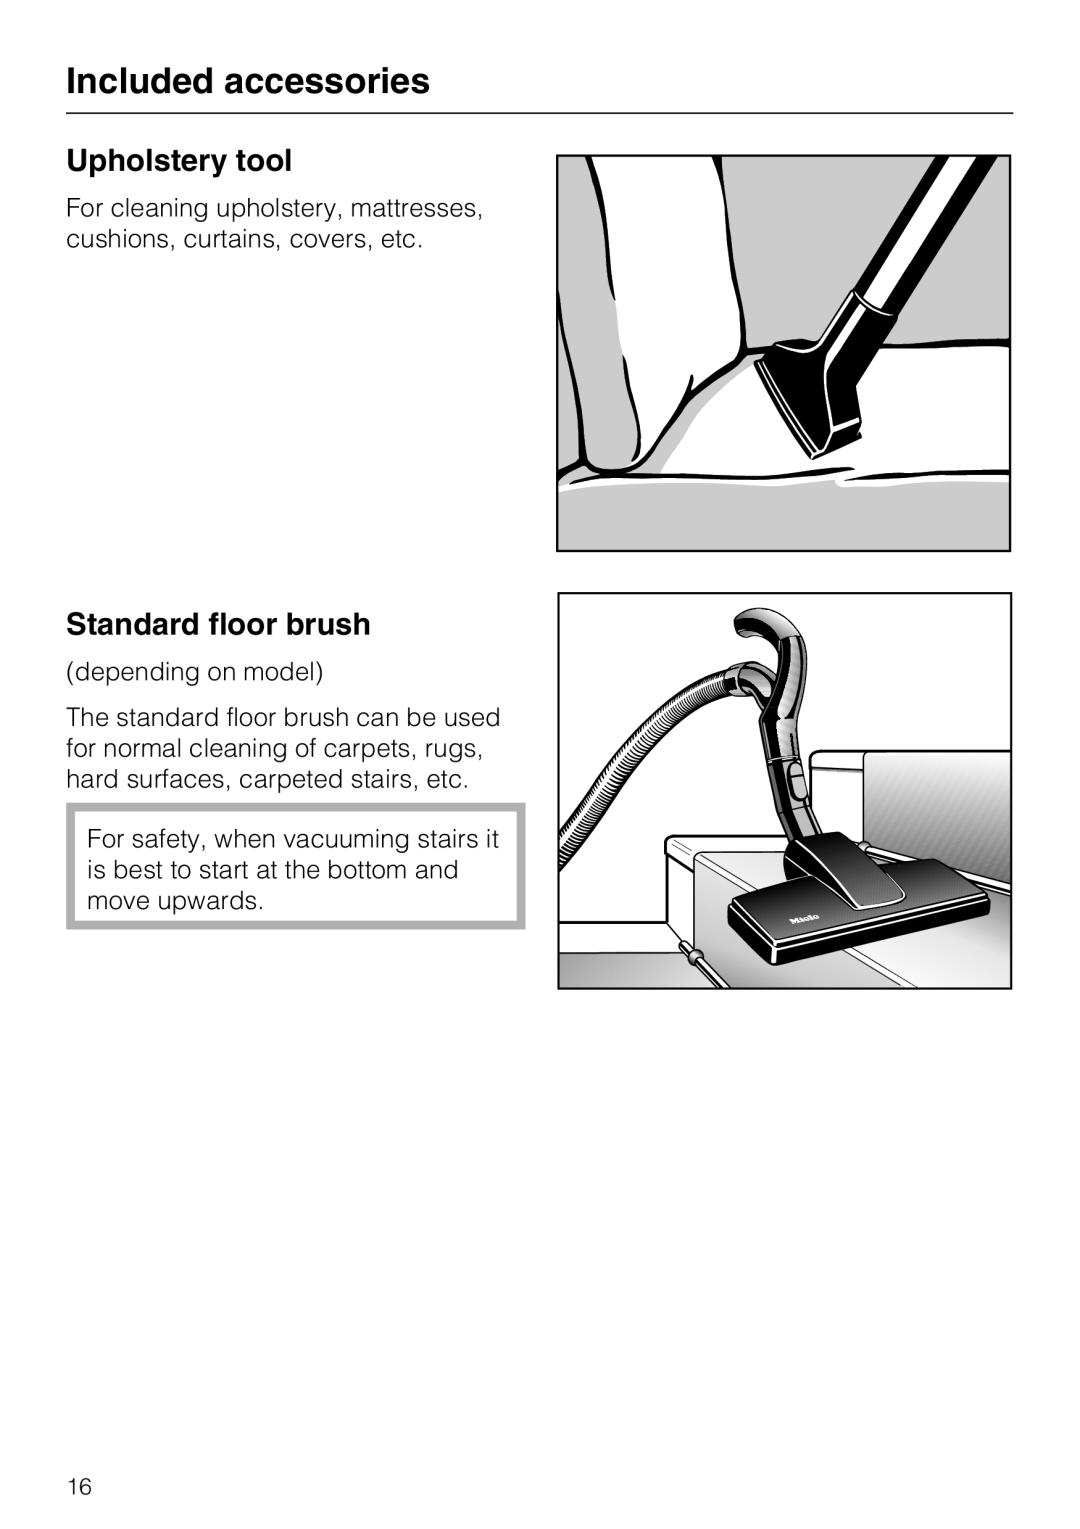 Miele S5981 operating instructions Upholstery tool, Standard floor brush, Included accessories 